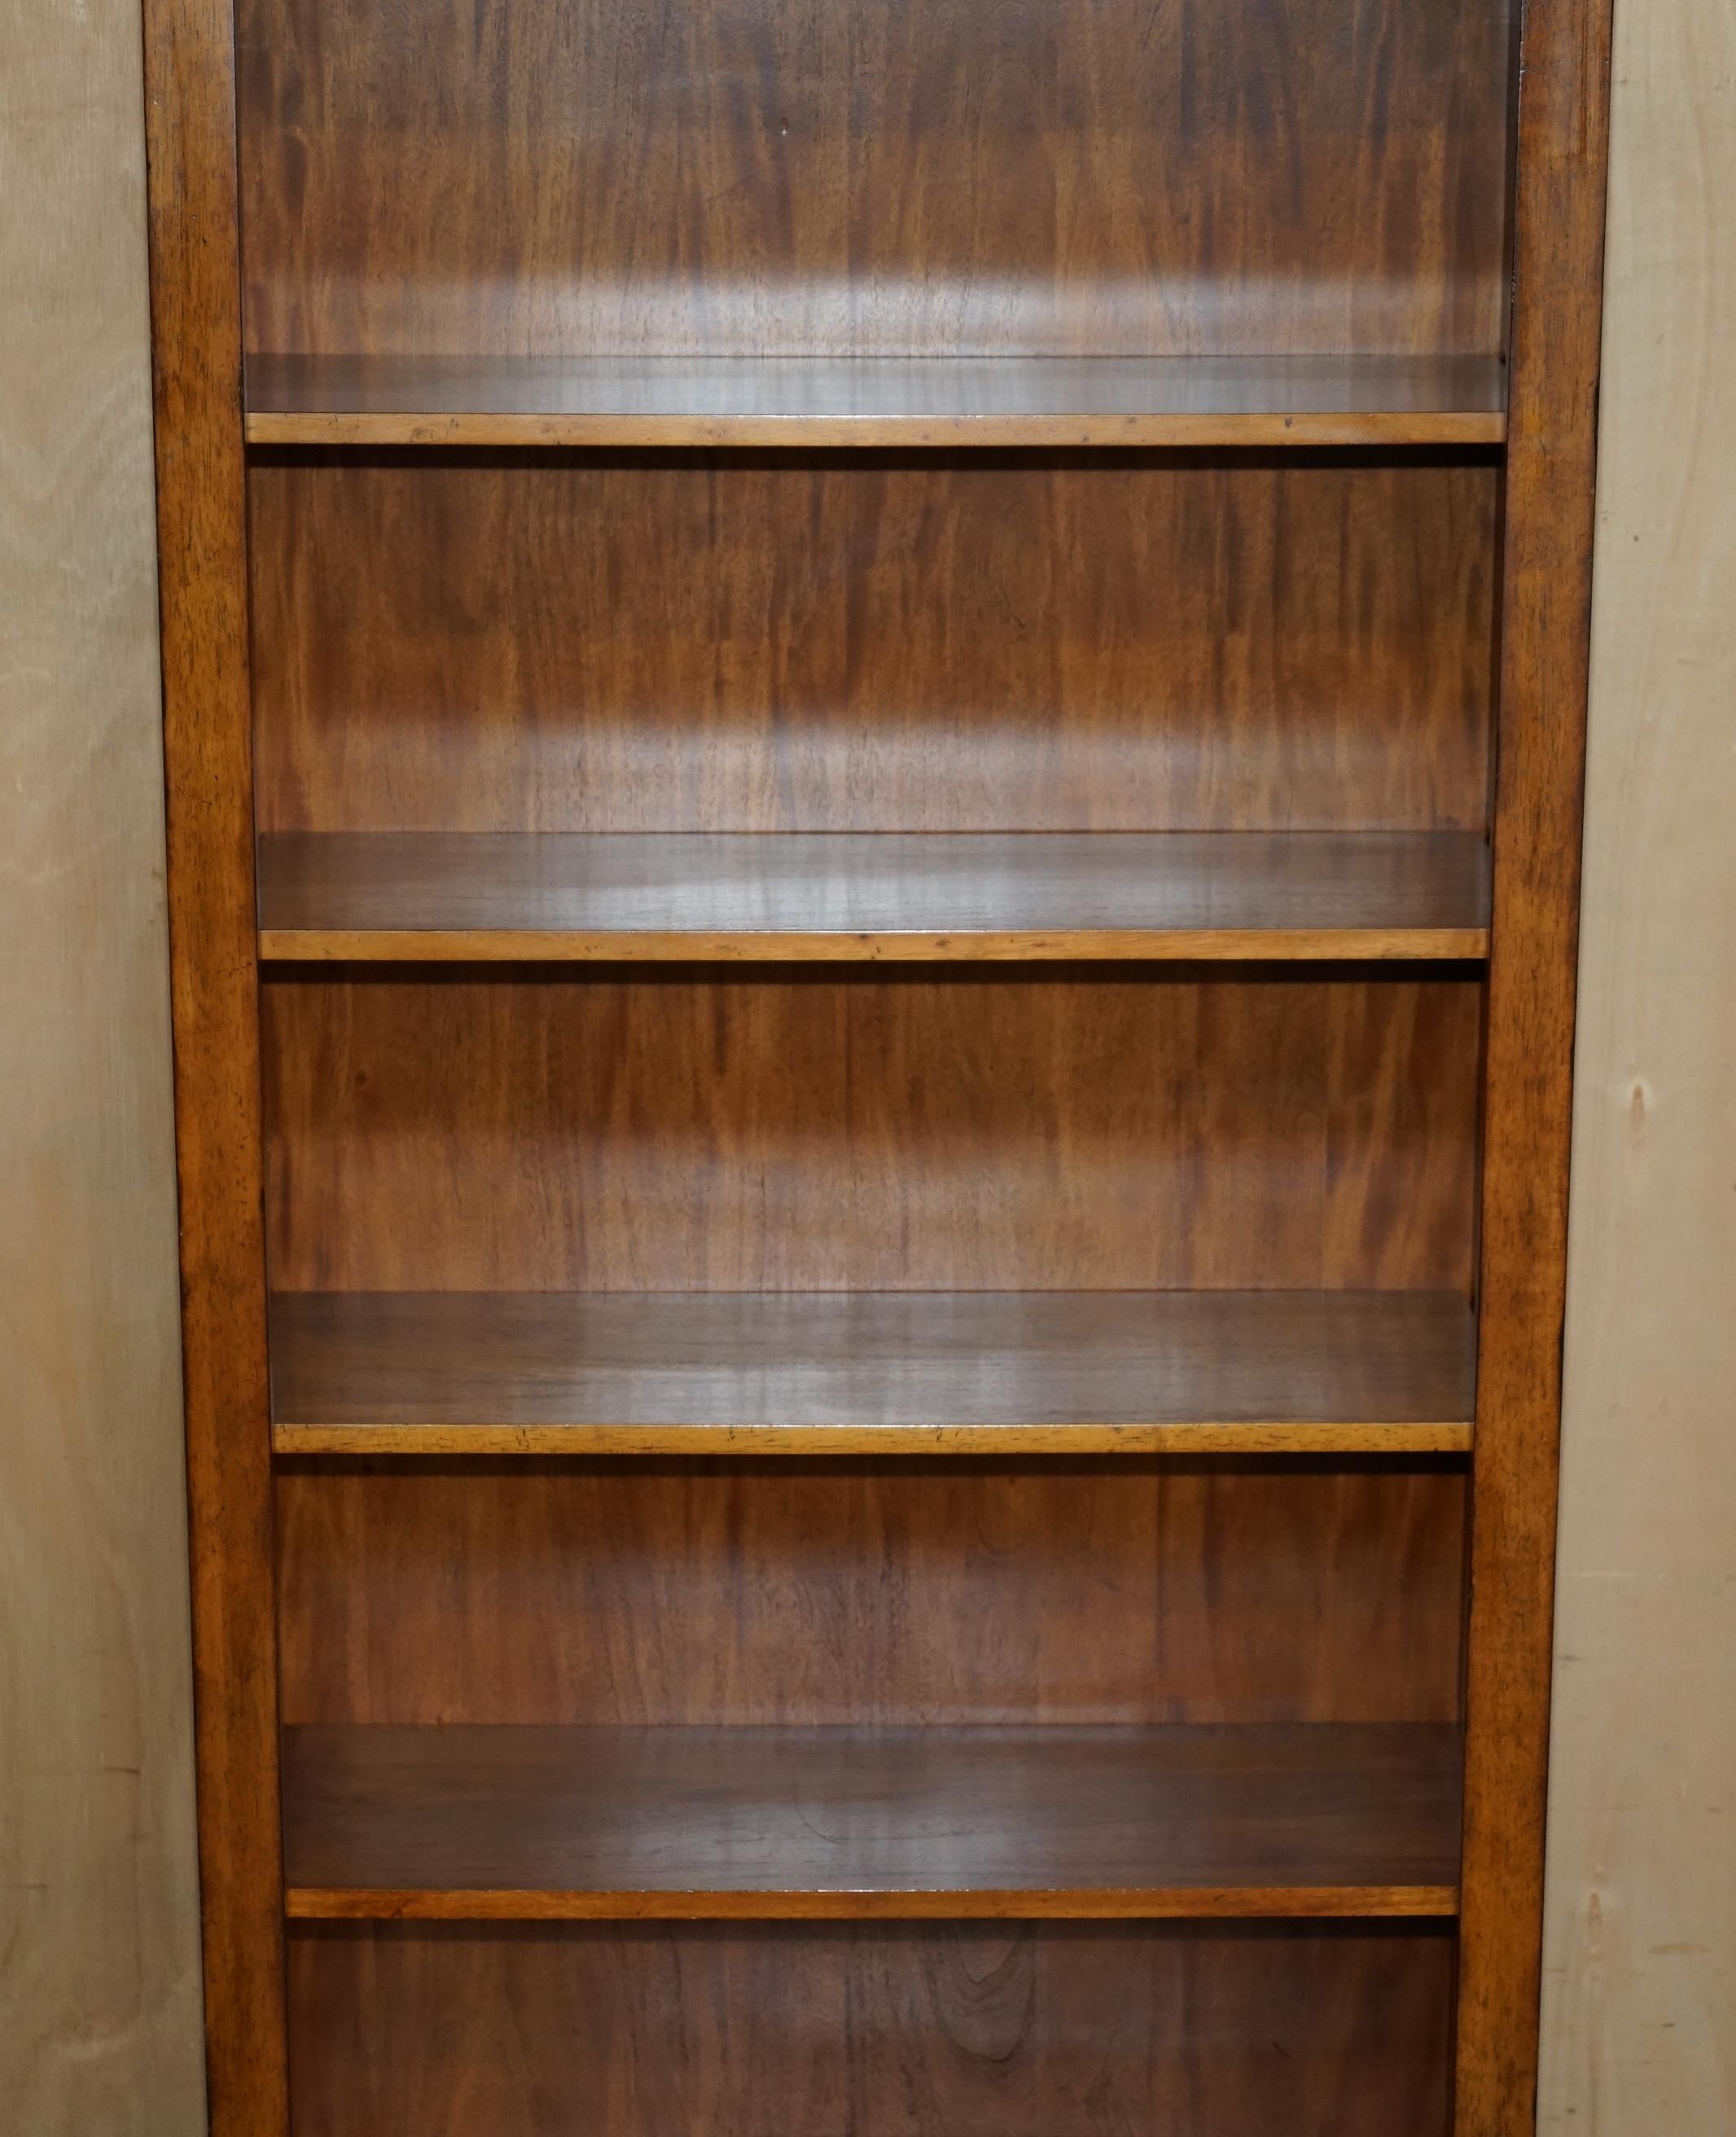 Hand-Crafted PAIR OF HARDWOOD FINISH TALL OPEN LIBRARY BOOKCASES BY THE DESiGNER ETHAN ALLEN